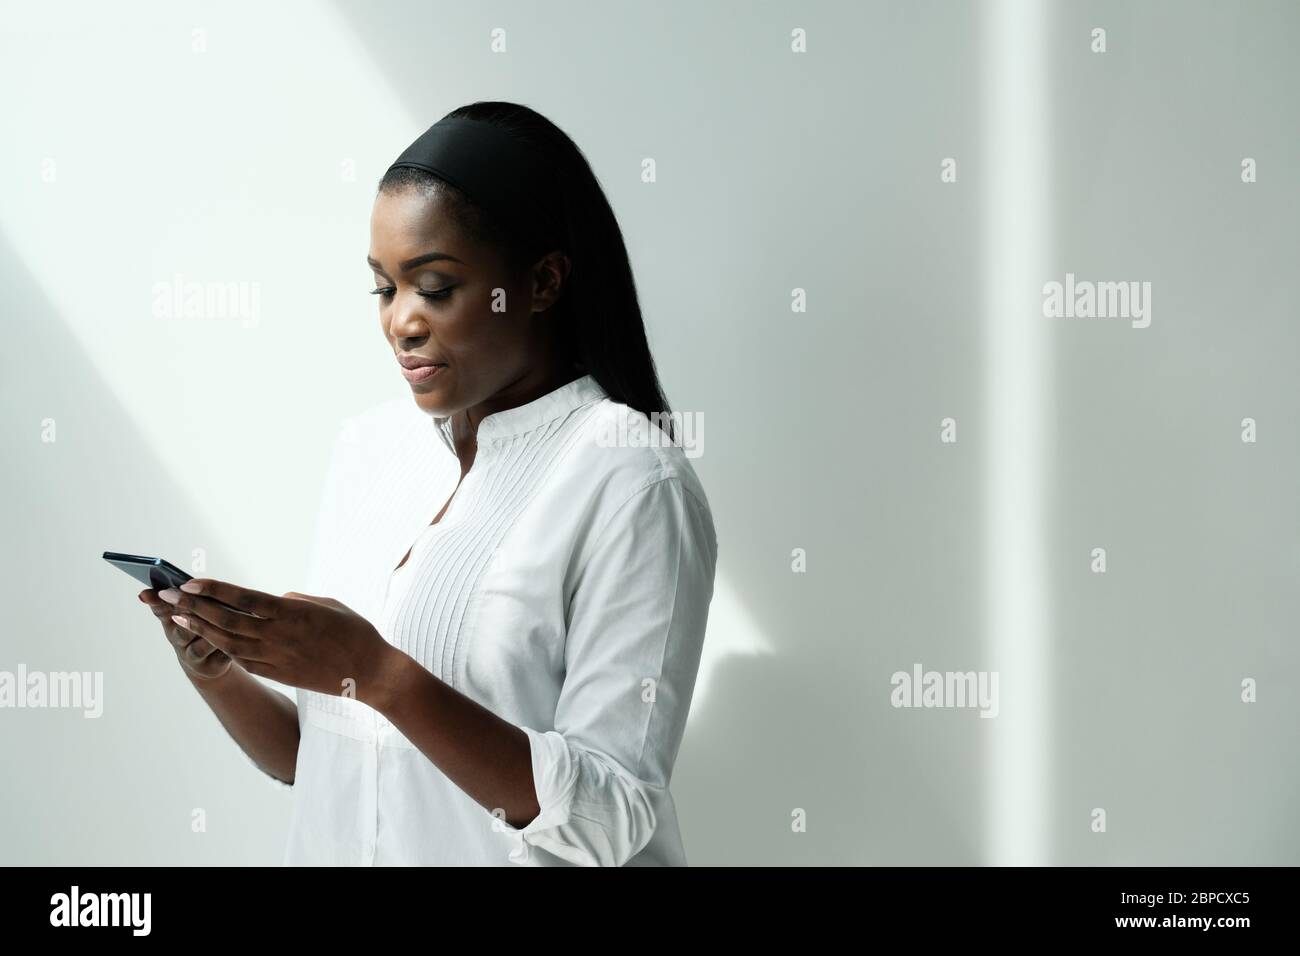 Black Woman Using Smartphone To Send Text Message Stock Photo